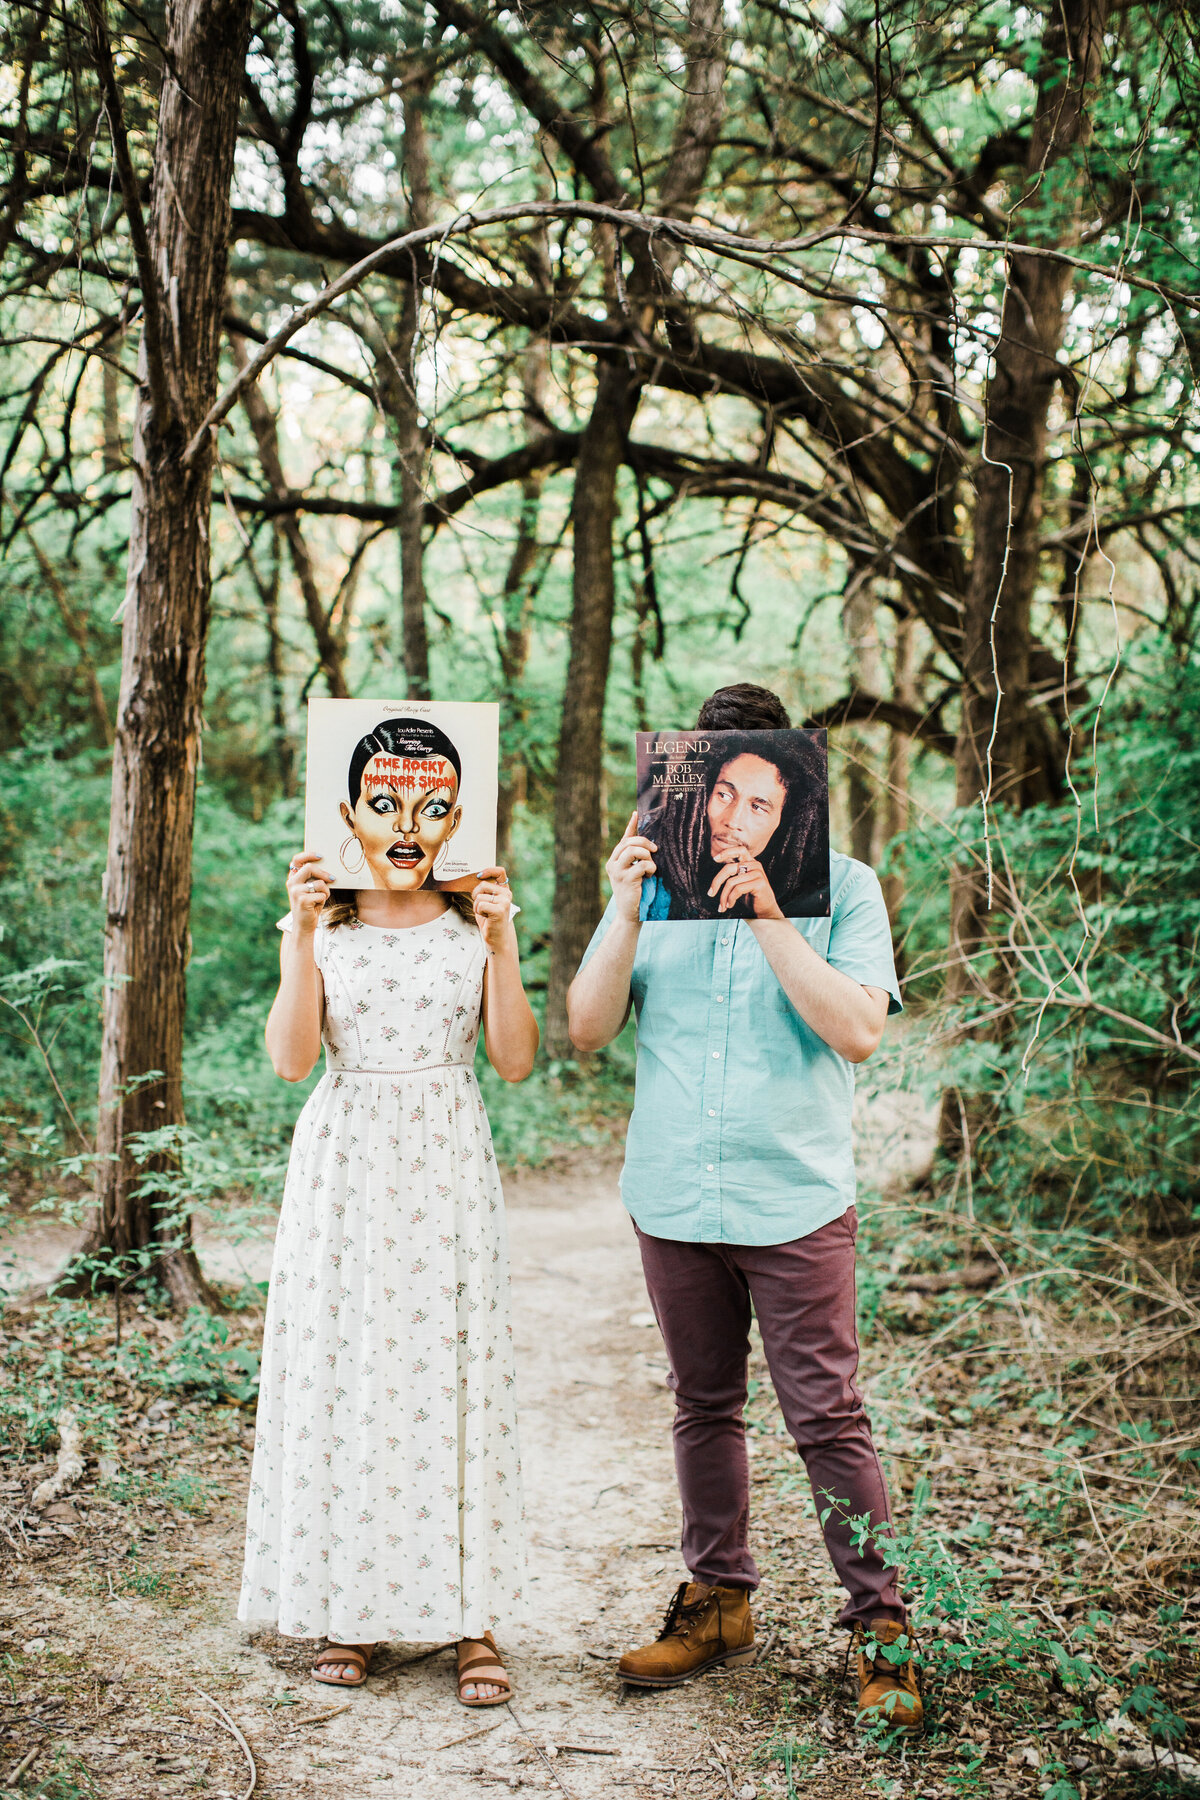 A couple posing in the woods while holding up vinyl album covers in front of their faces during their engagement session in Dallas, Texas. The woman on the left is wearing a long white dress covered in small flowers and is holding up the soundtrack to "The Rocky Horror Picture Show" in front of her face. The man on the right is wearing a blue dress shirt and maroon pants and is holding up Bob Marley's "Legend" in front of his face.